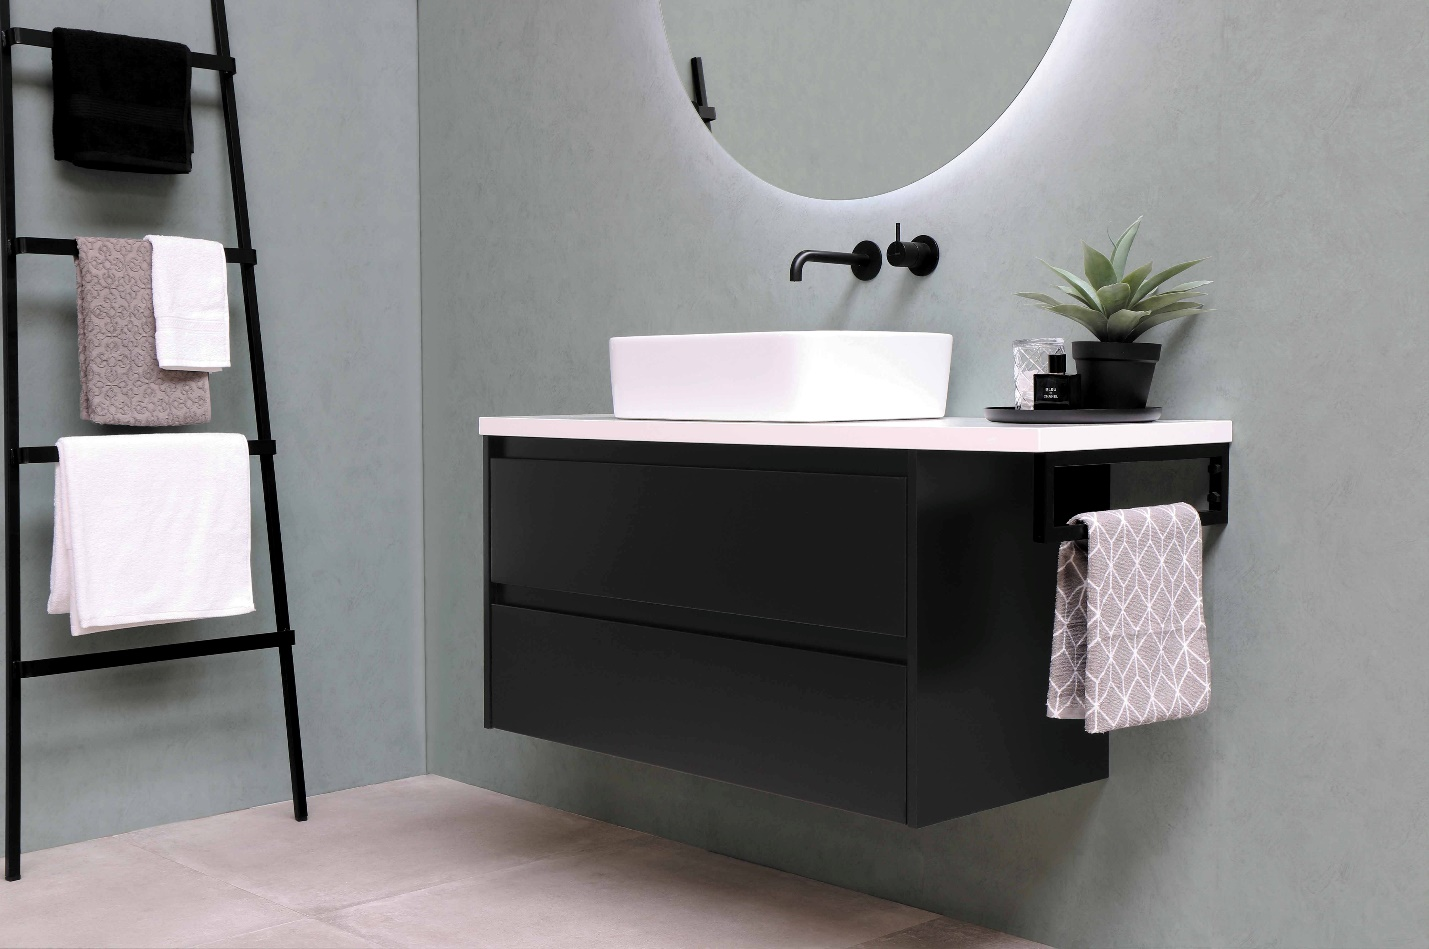 A modern bathroom with a white marble countertop and contrasting black storage